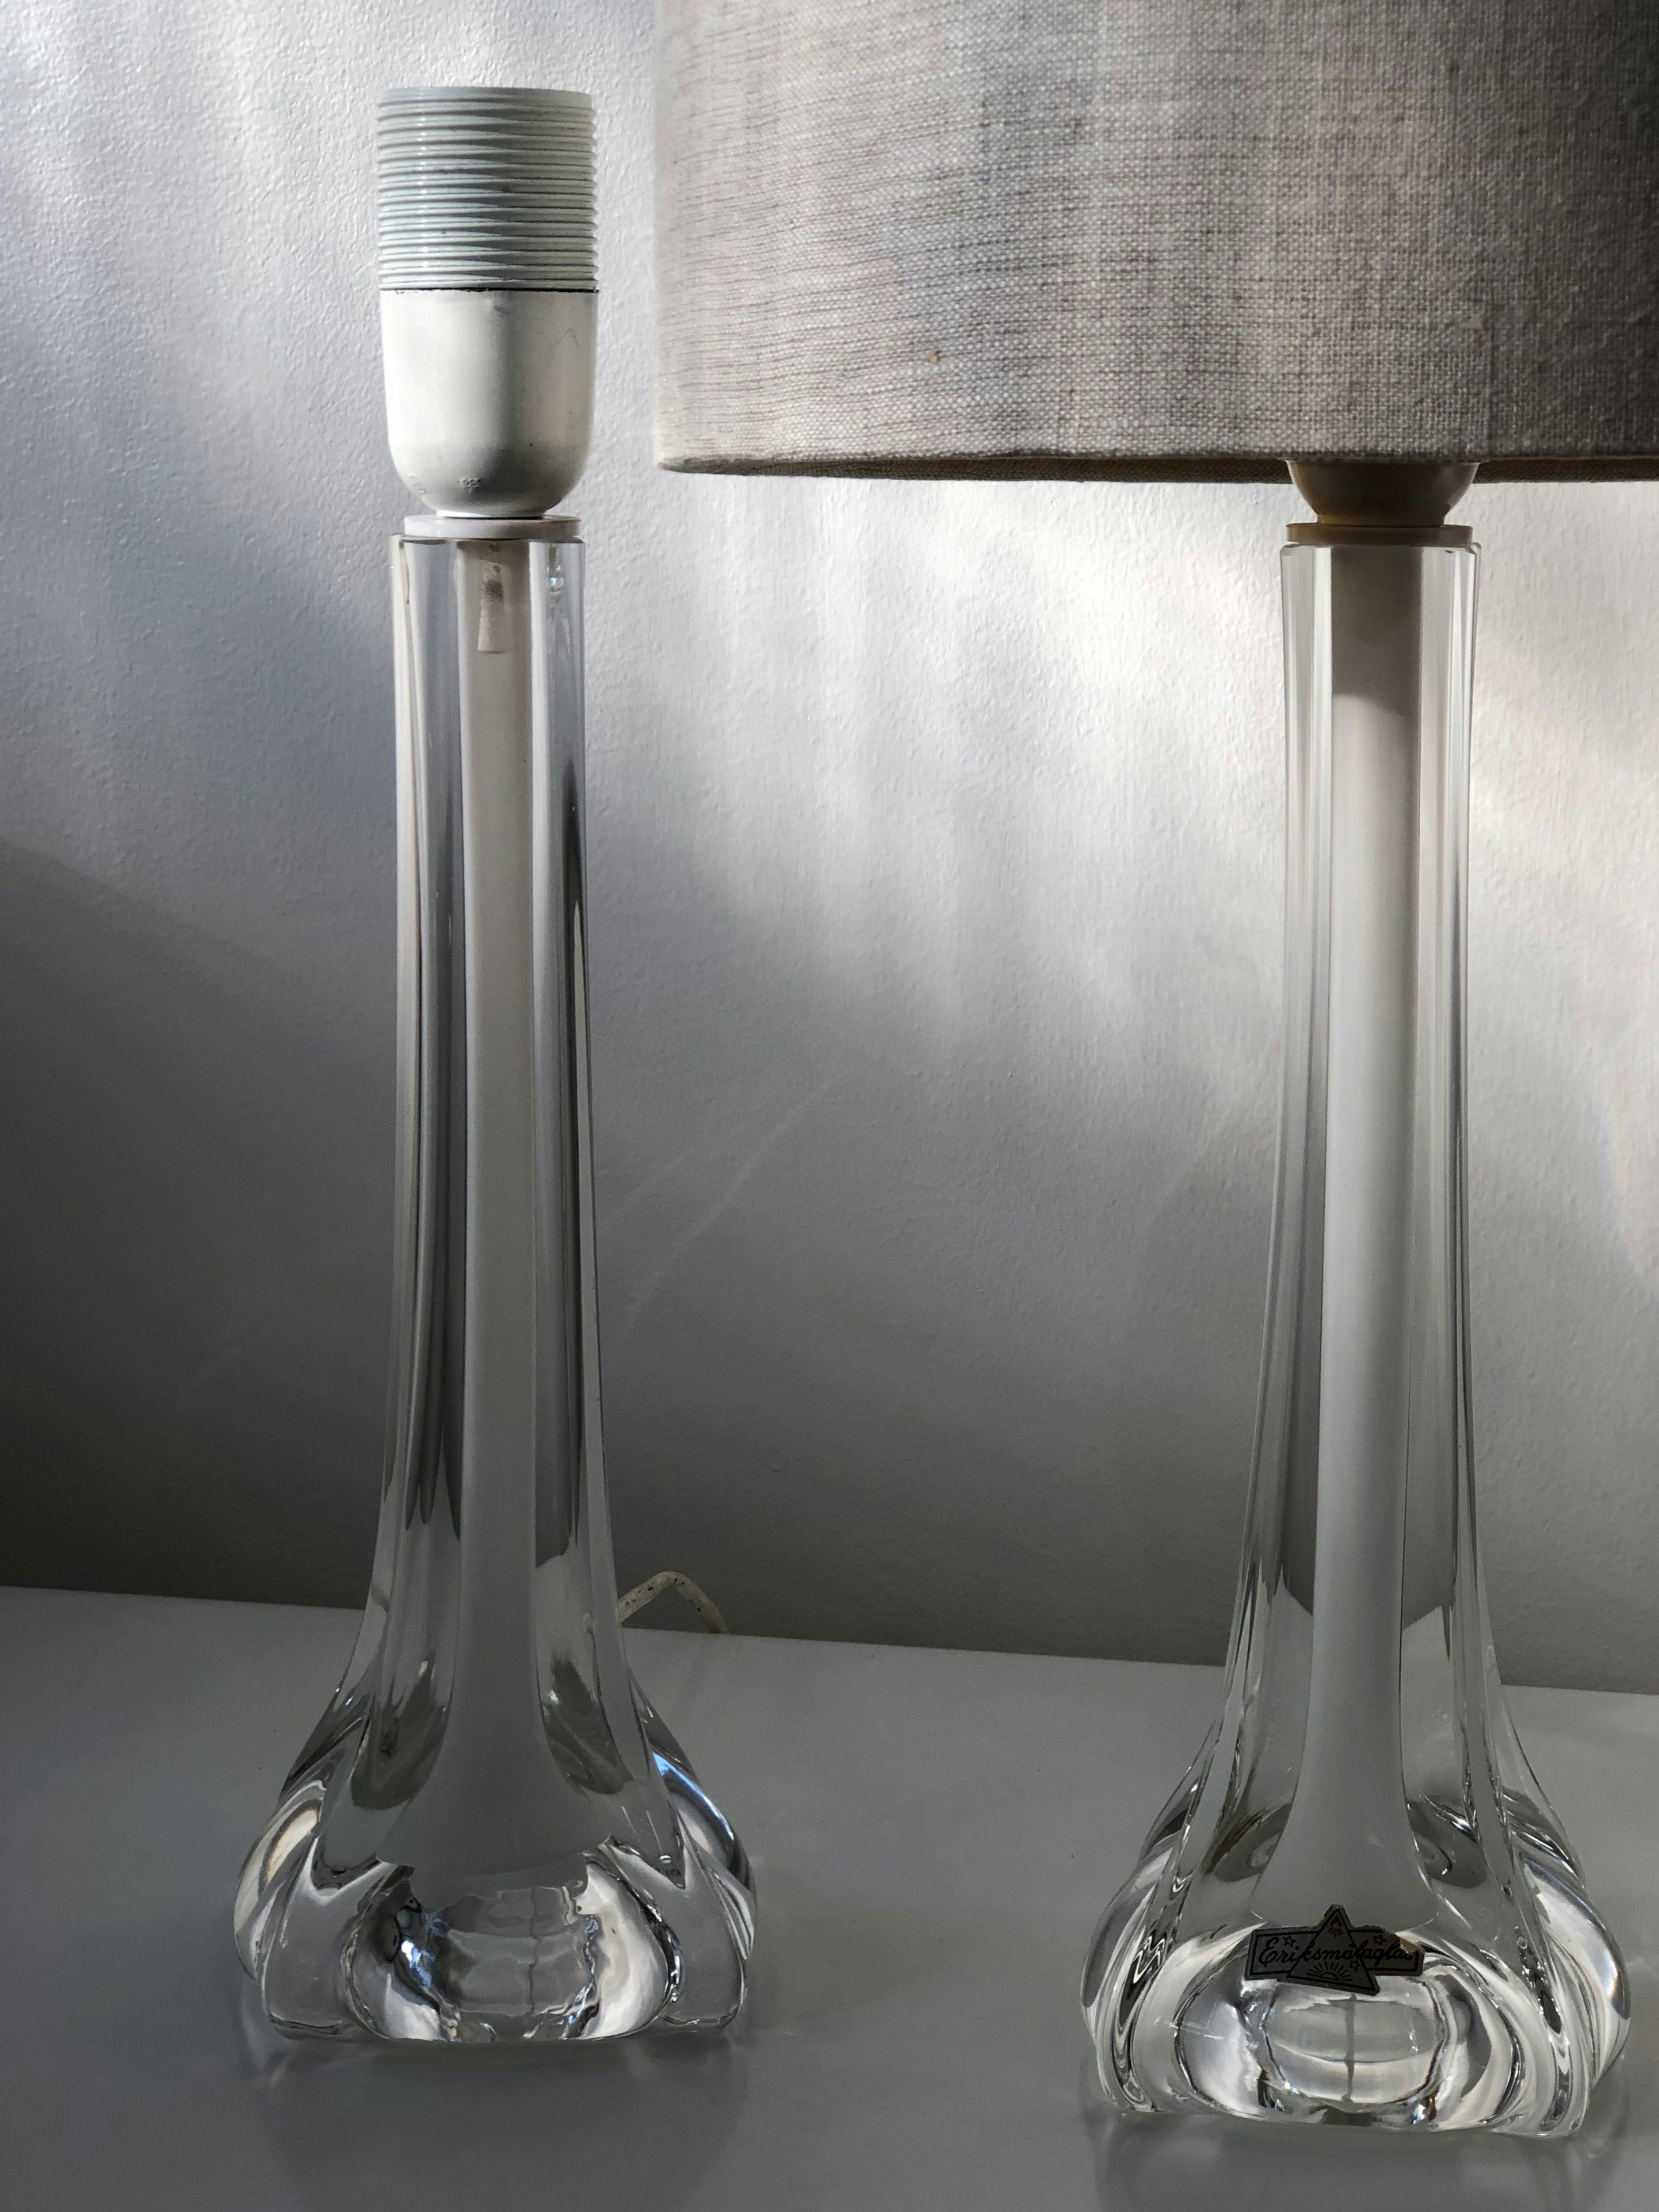 Pair of Flygsfors white Mid-century Modern Table lamps by Paul Kedelv